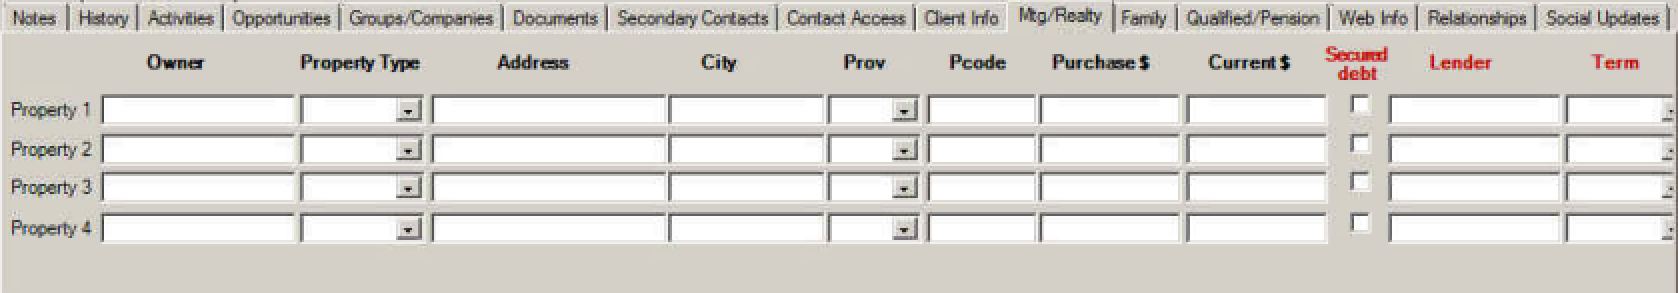 Mortgages in Contact table